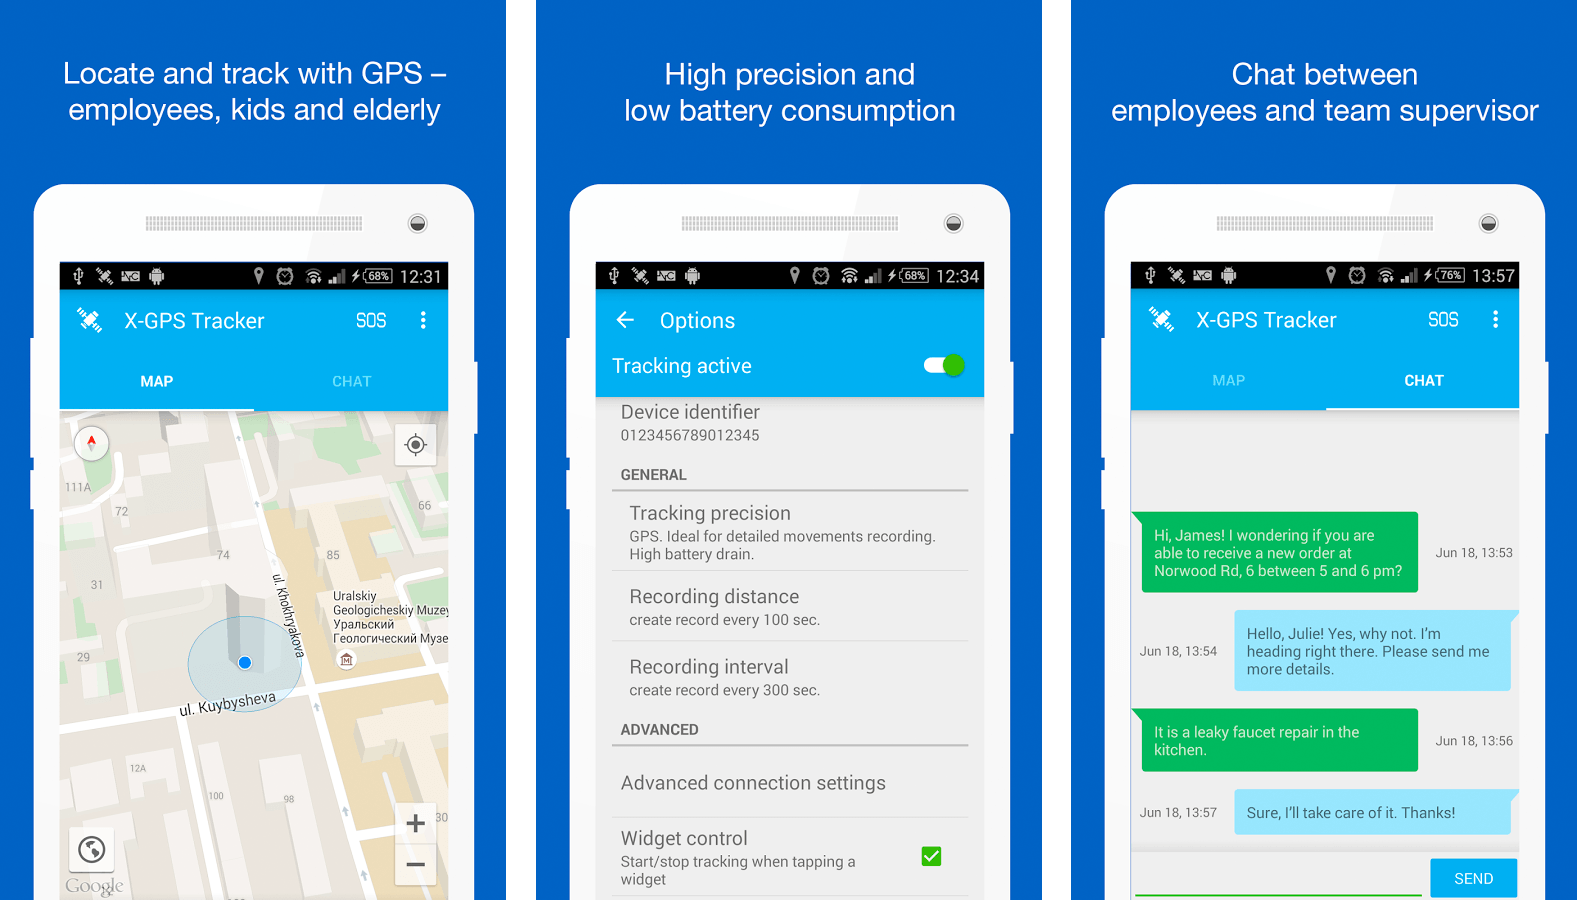 X-GPS Tracker for Android – version 2.0 released